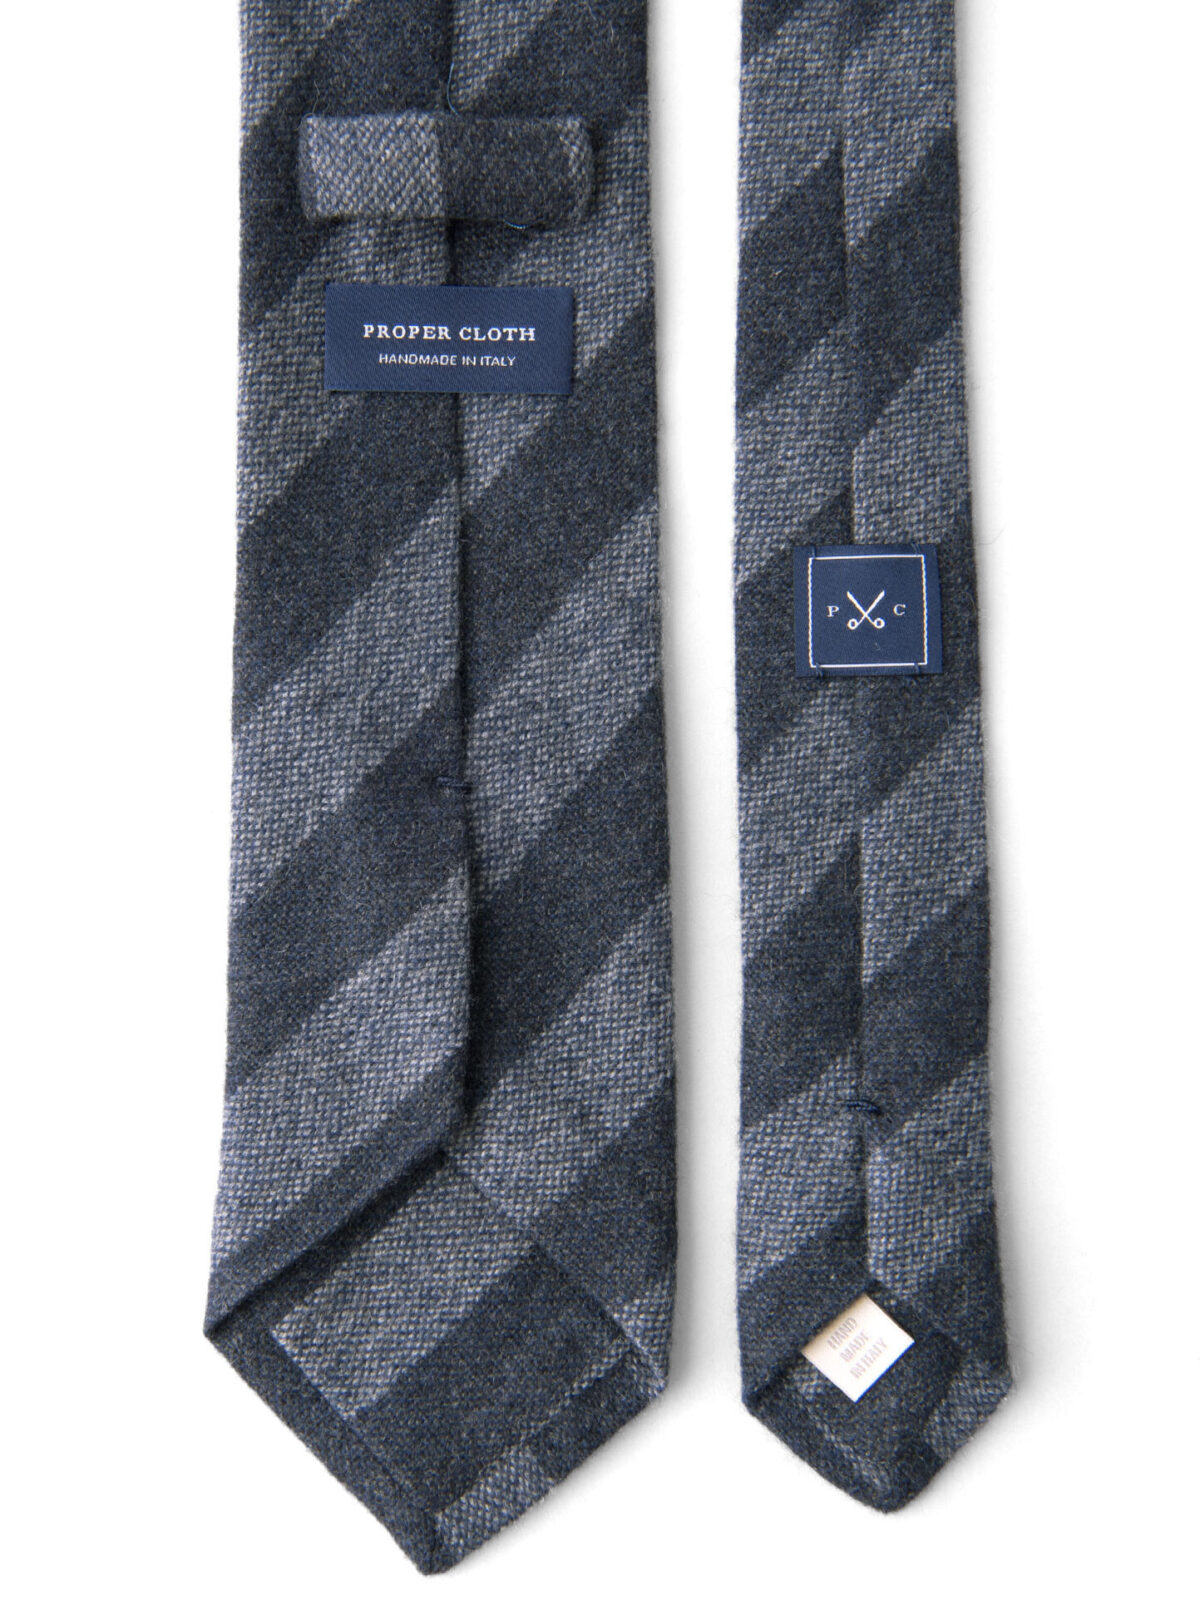 Grey and Charcoal Striped Cashmere Tie by Proper Cloth